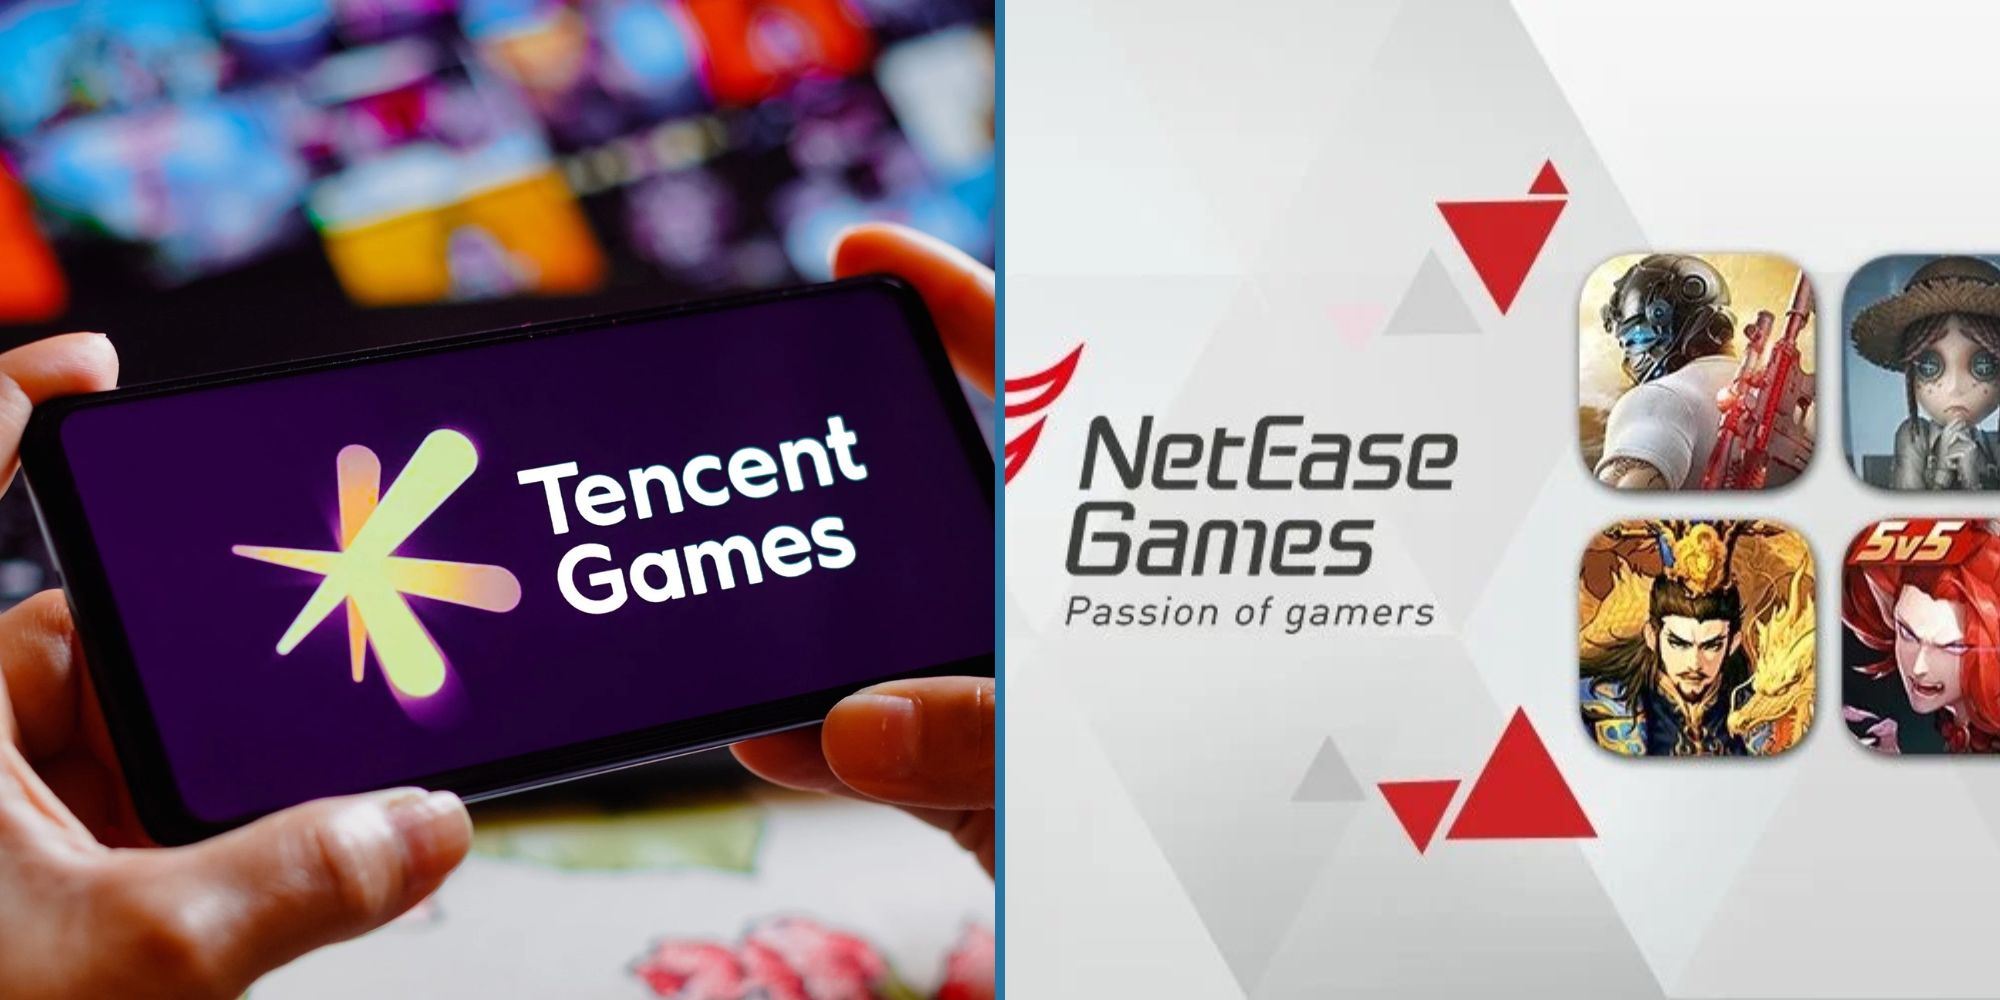 Tencent And NetEase Lost Nearly $80 Billion To China’s New In-Game Spending Regulation